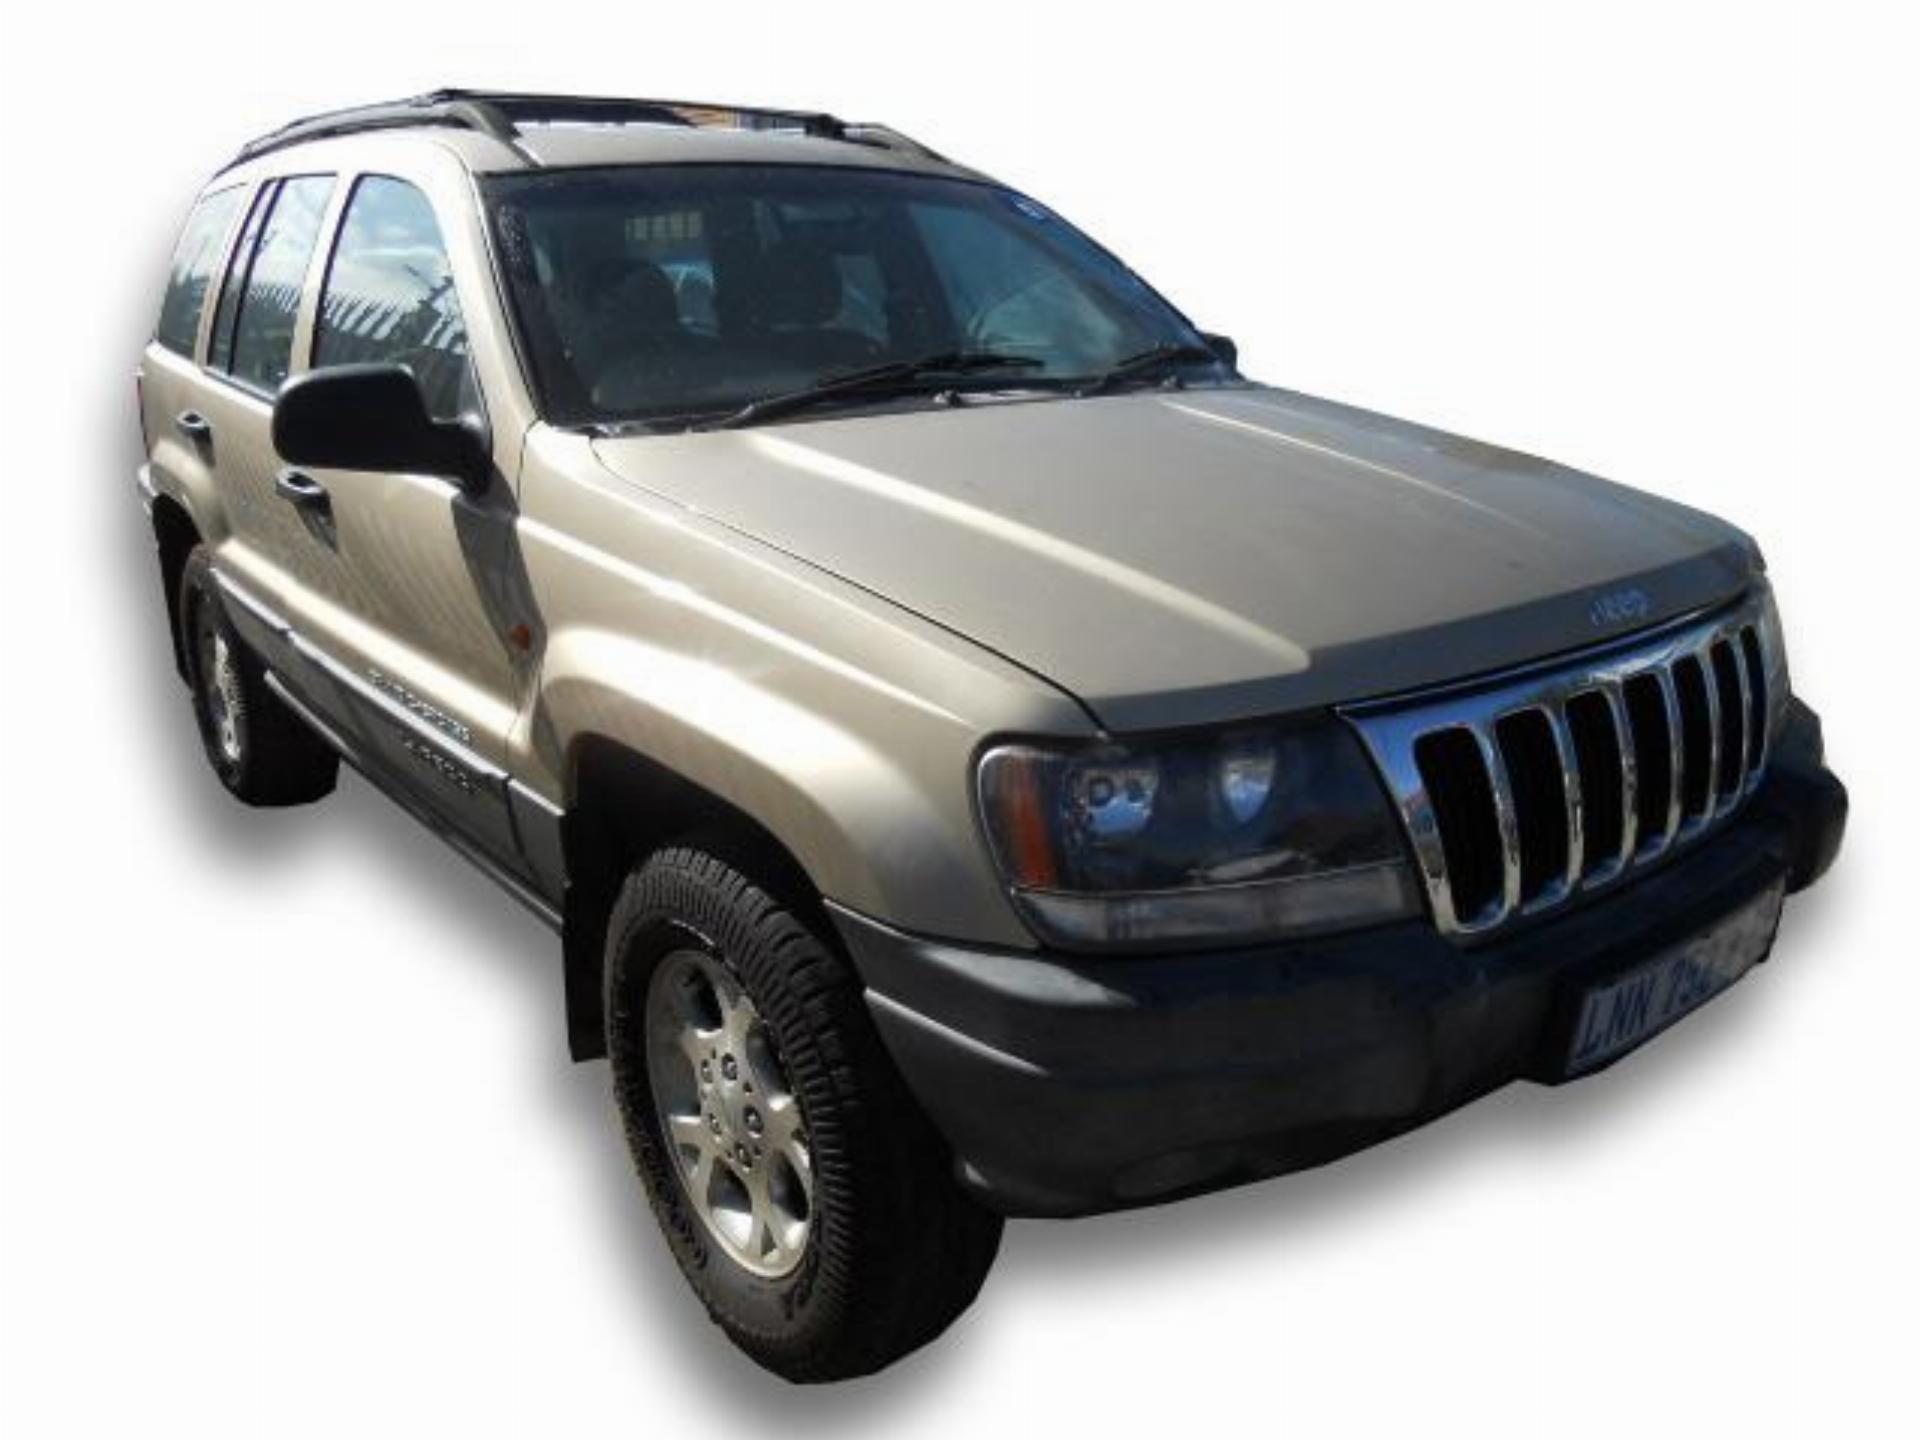 Repossessed Jeep Grand Cherokee 3.1 TD 2000 on auction